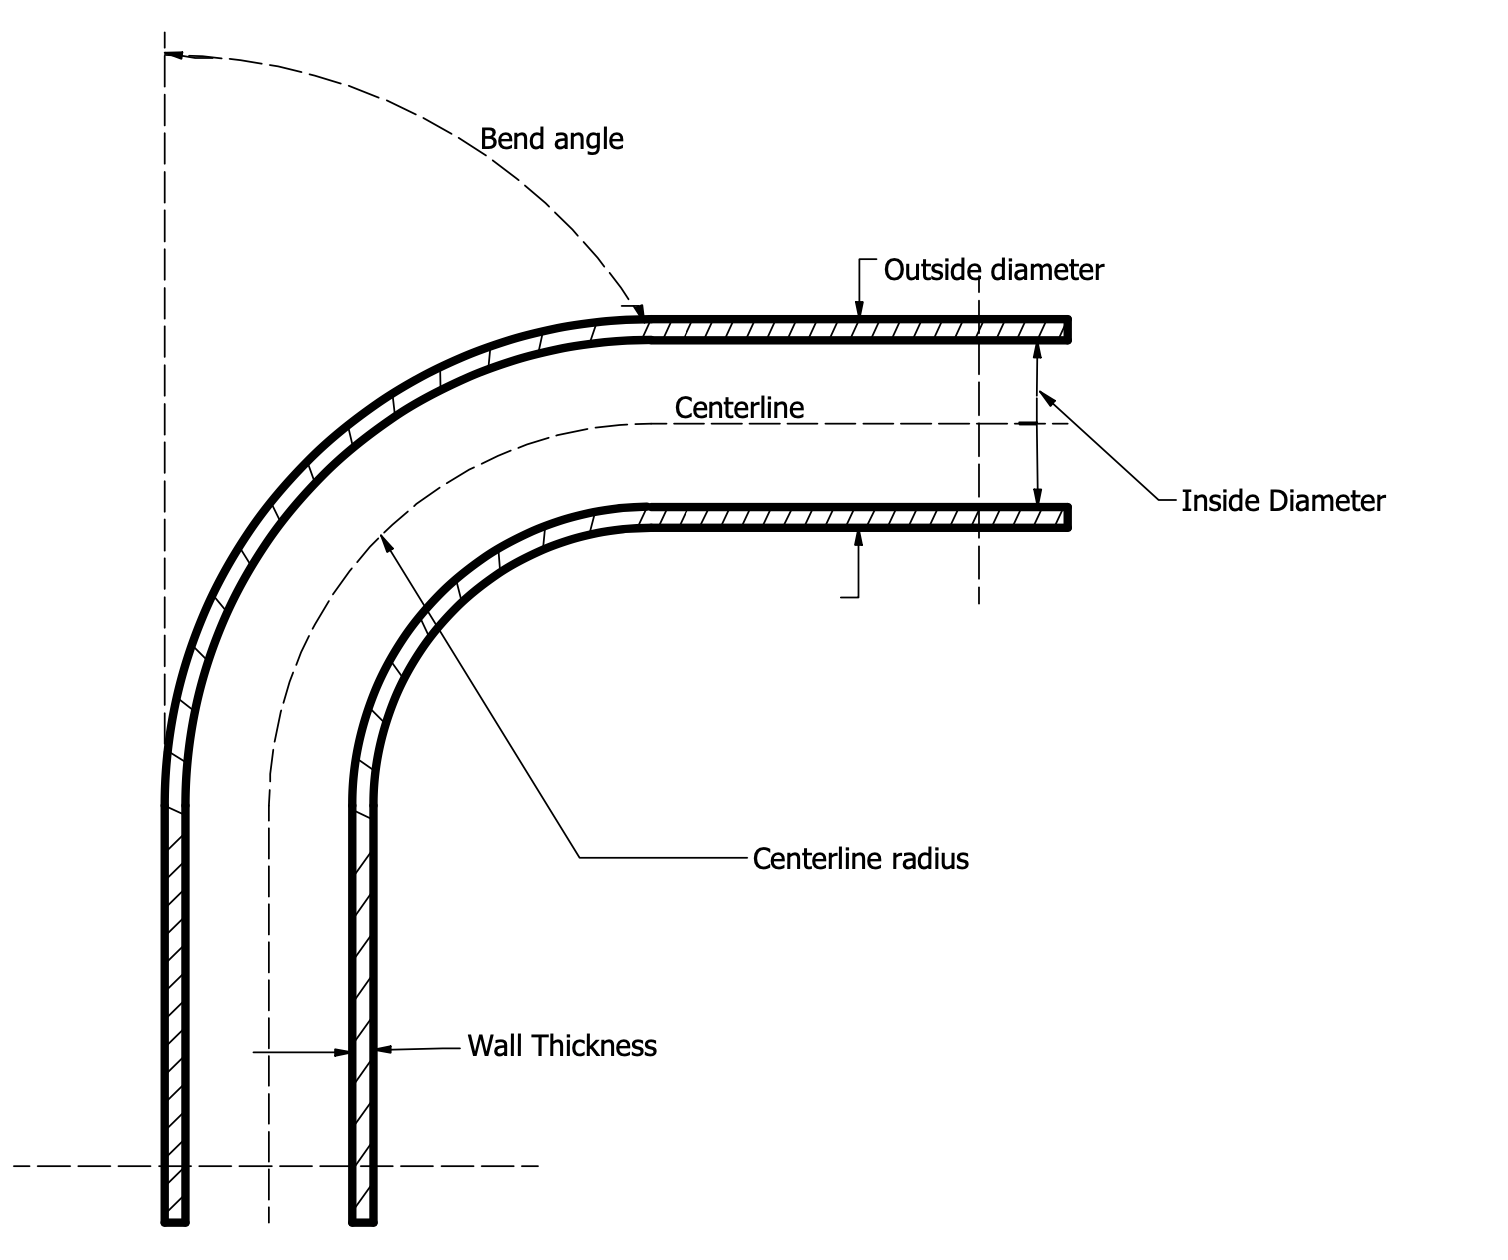 Sectional view of a bent pipe. Source: Temitayo Oketola